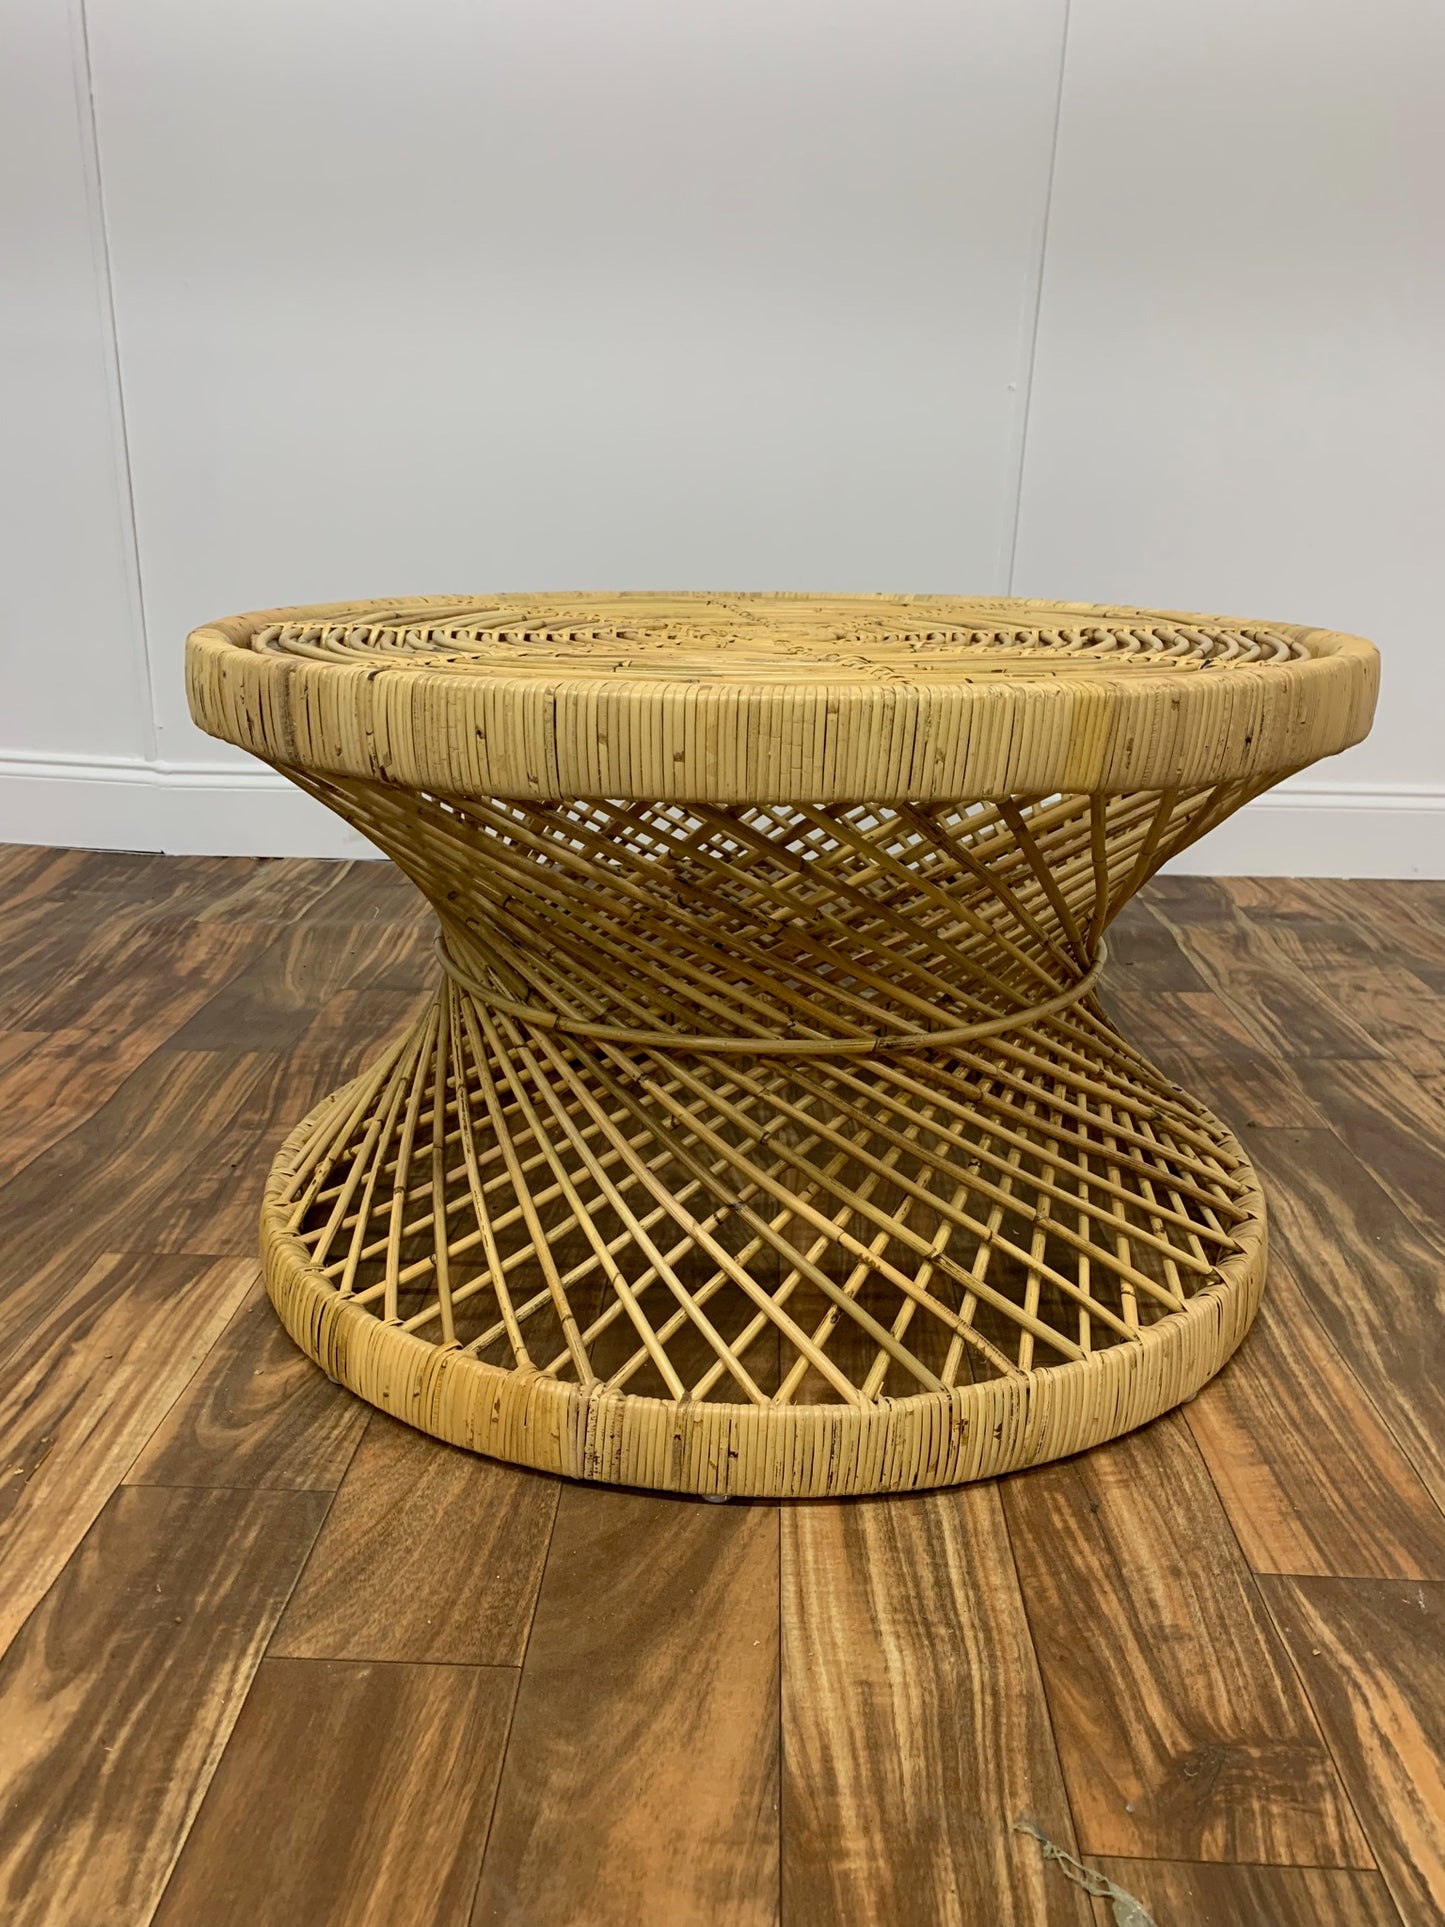 ROUND WICKER RATTAN COFEE TABLE